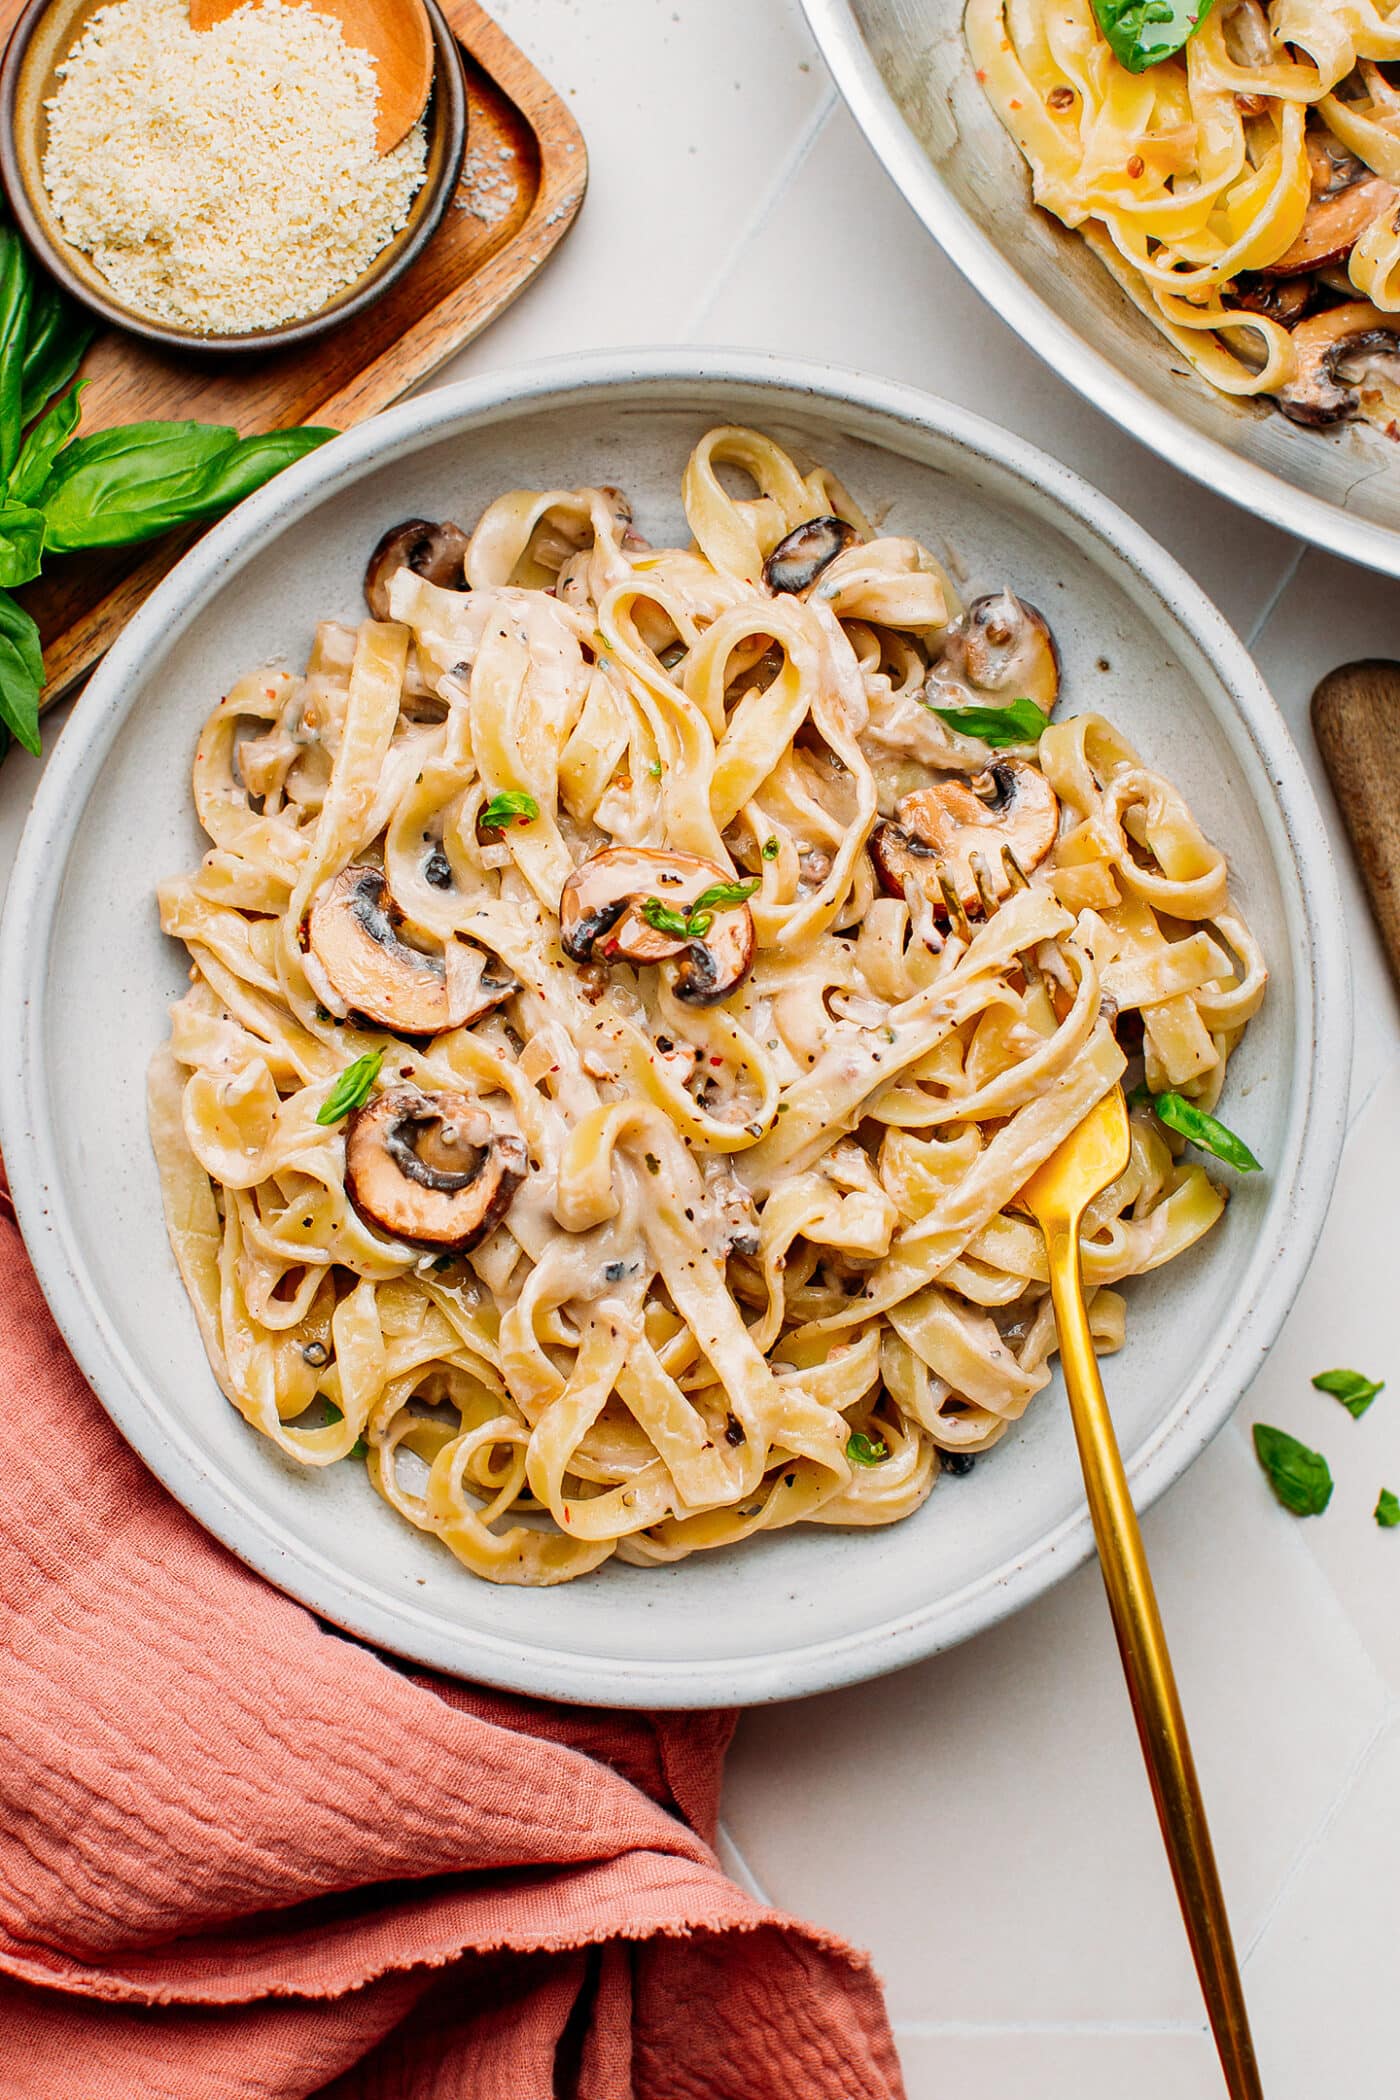 Mushroom pasta with peppercorn sauce on a plate.